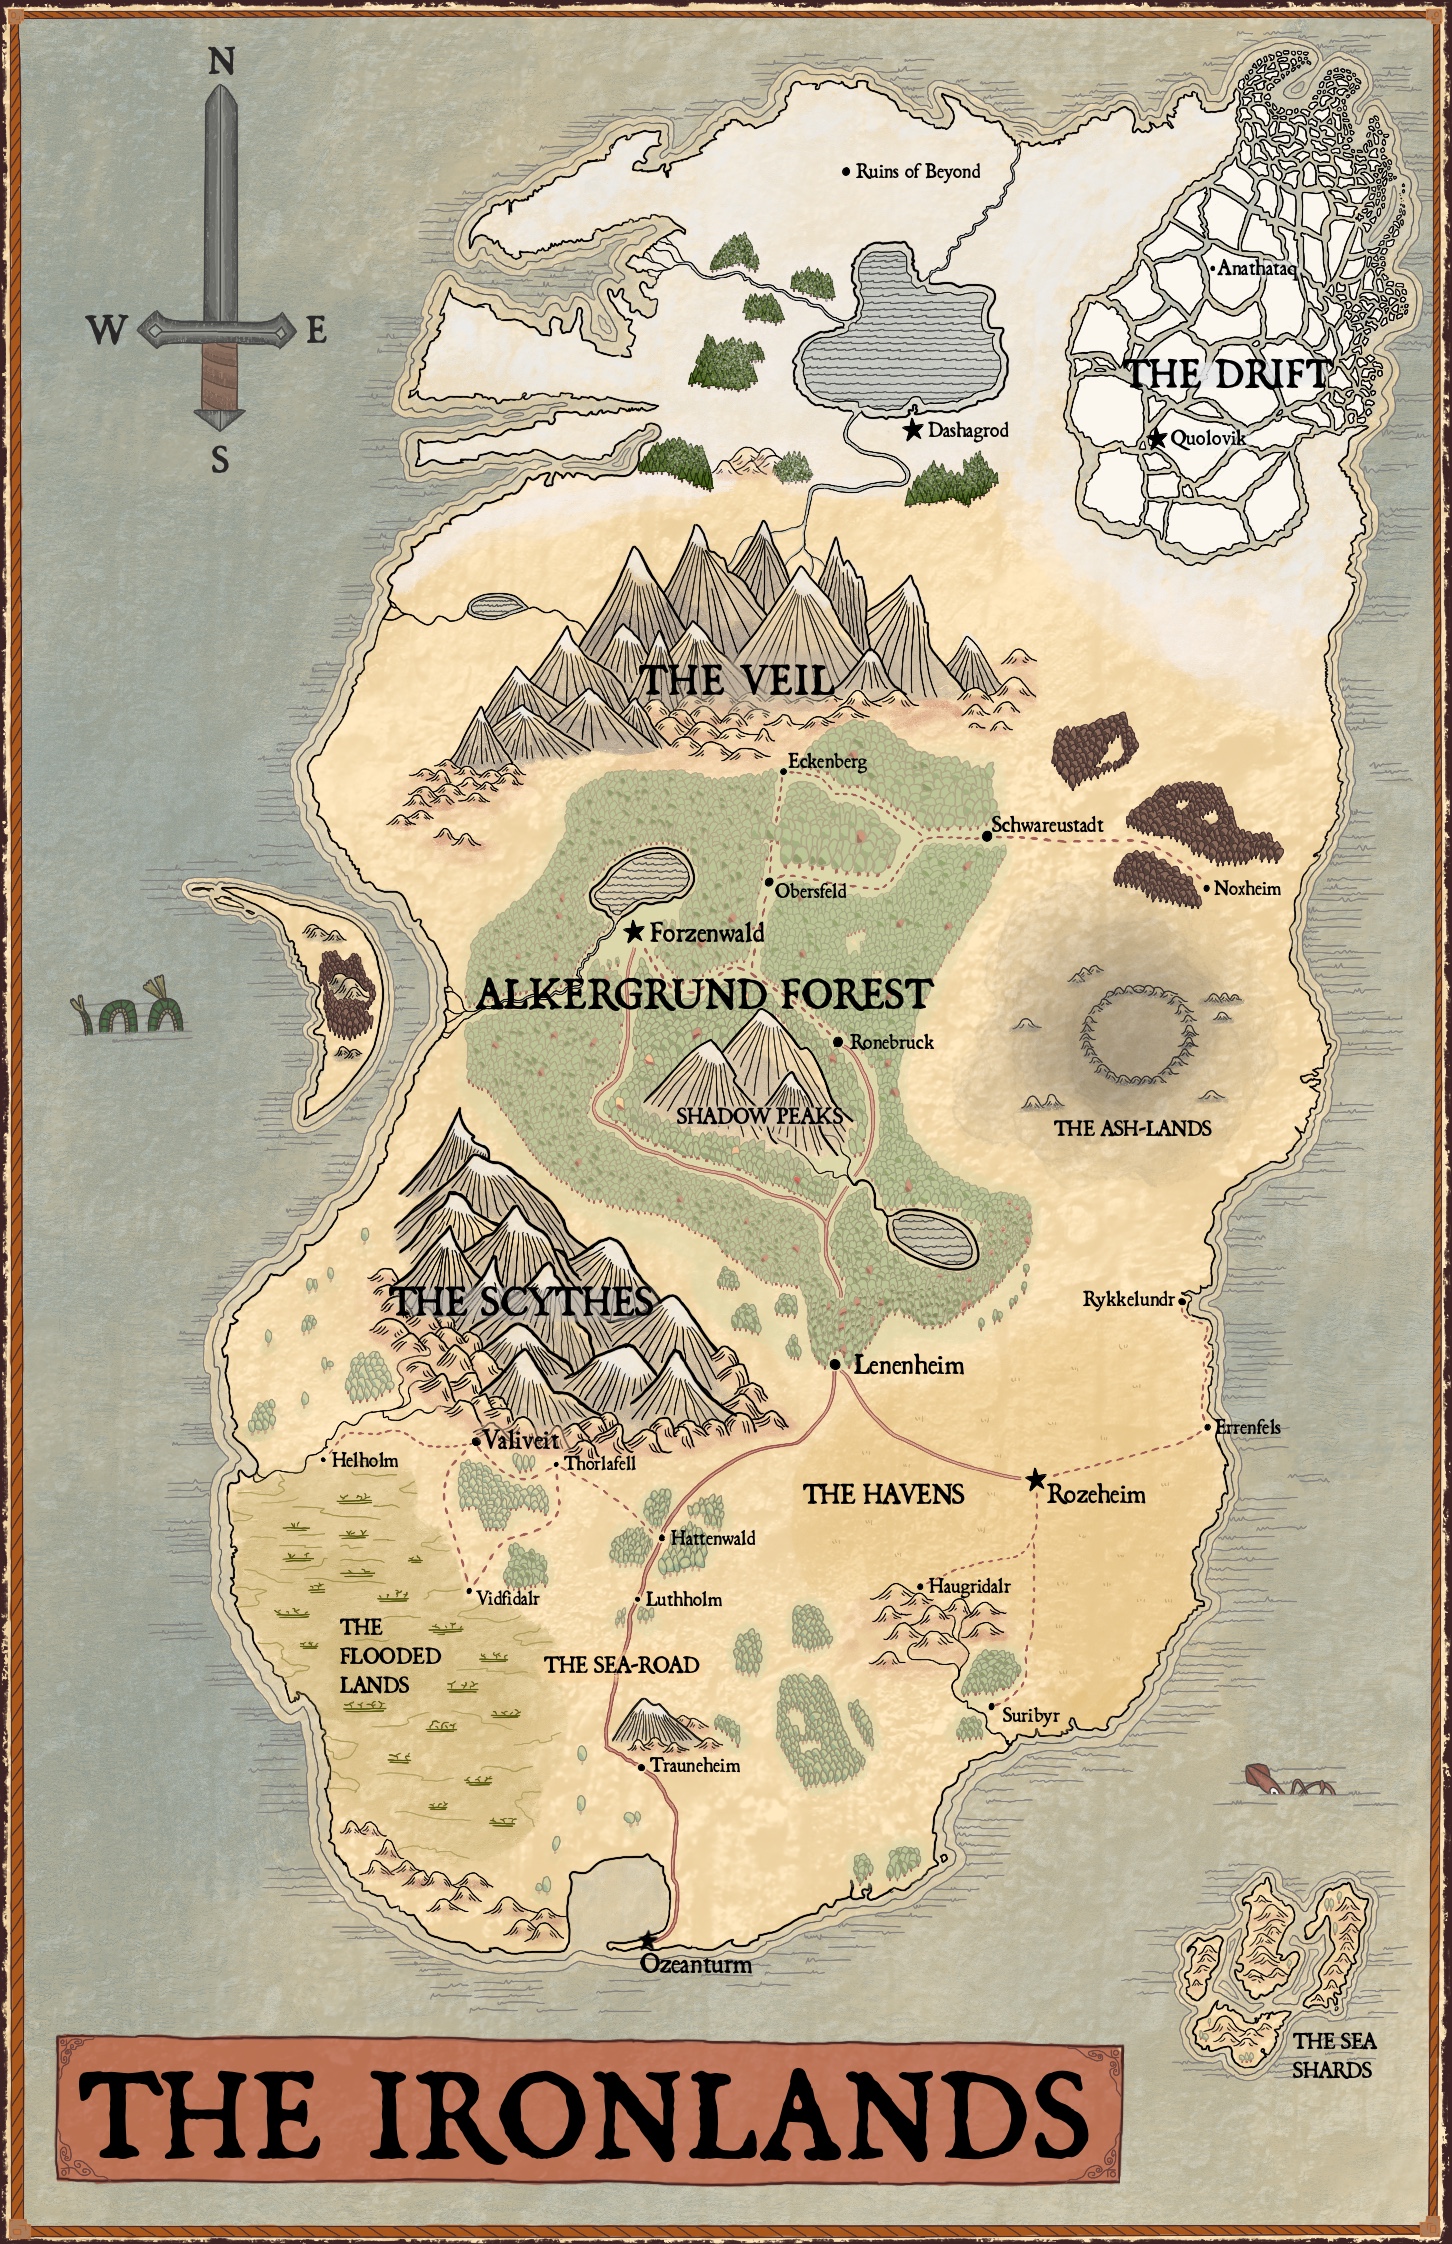 A world map of the Ironlands